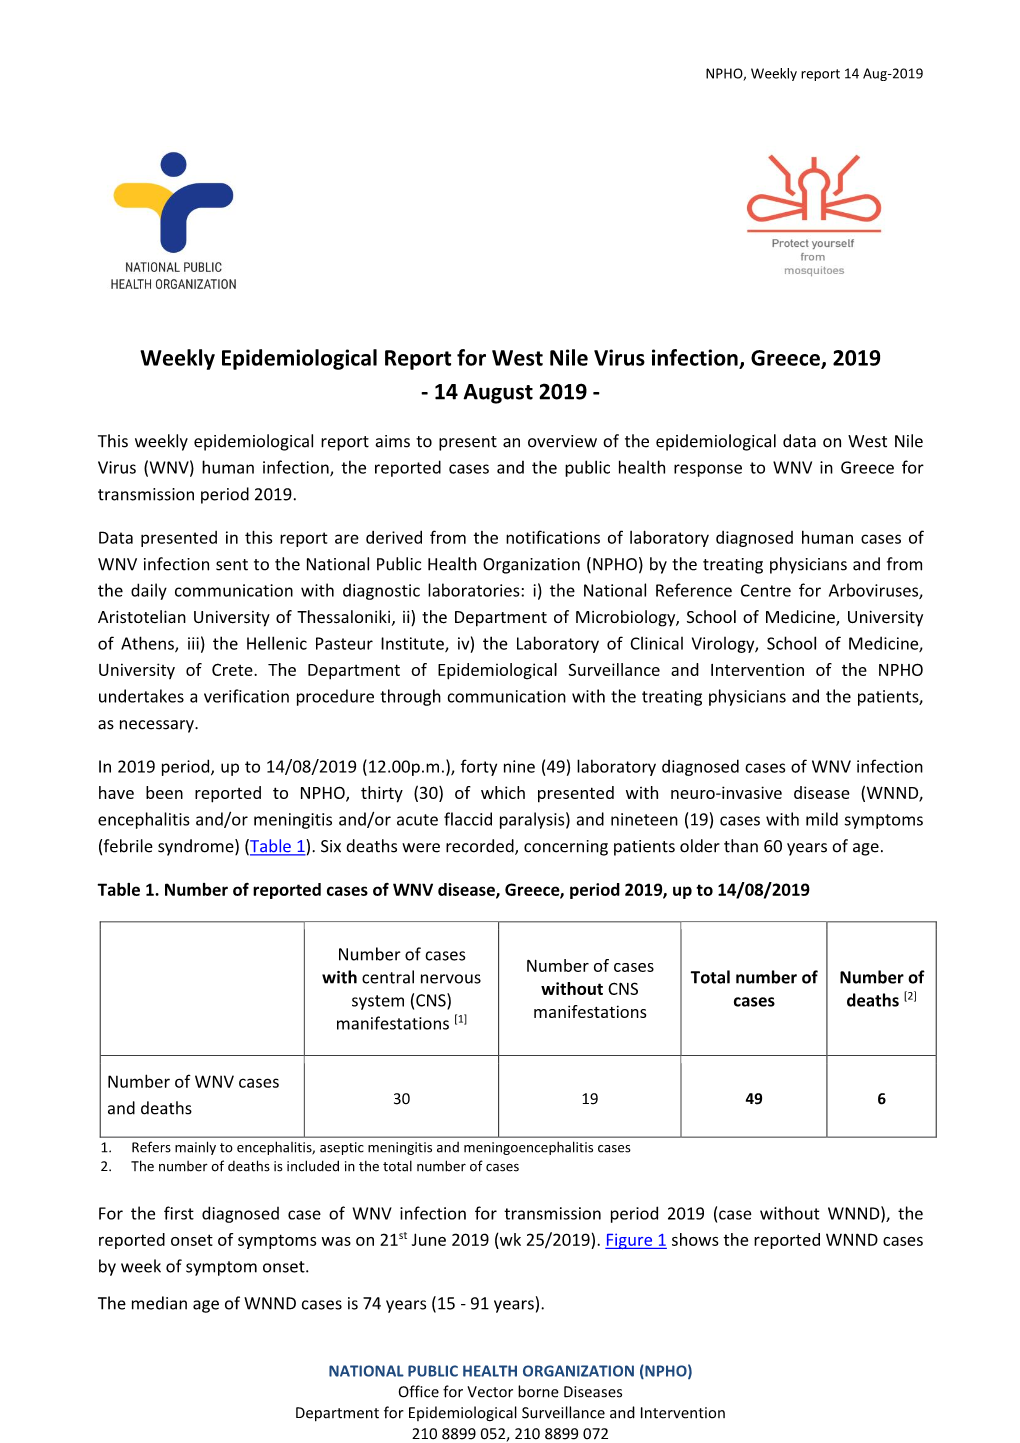 Weekly Epidemiological Report for West Nile Virus Infection, Greece, 2019 - 14 August 2019 - 1